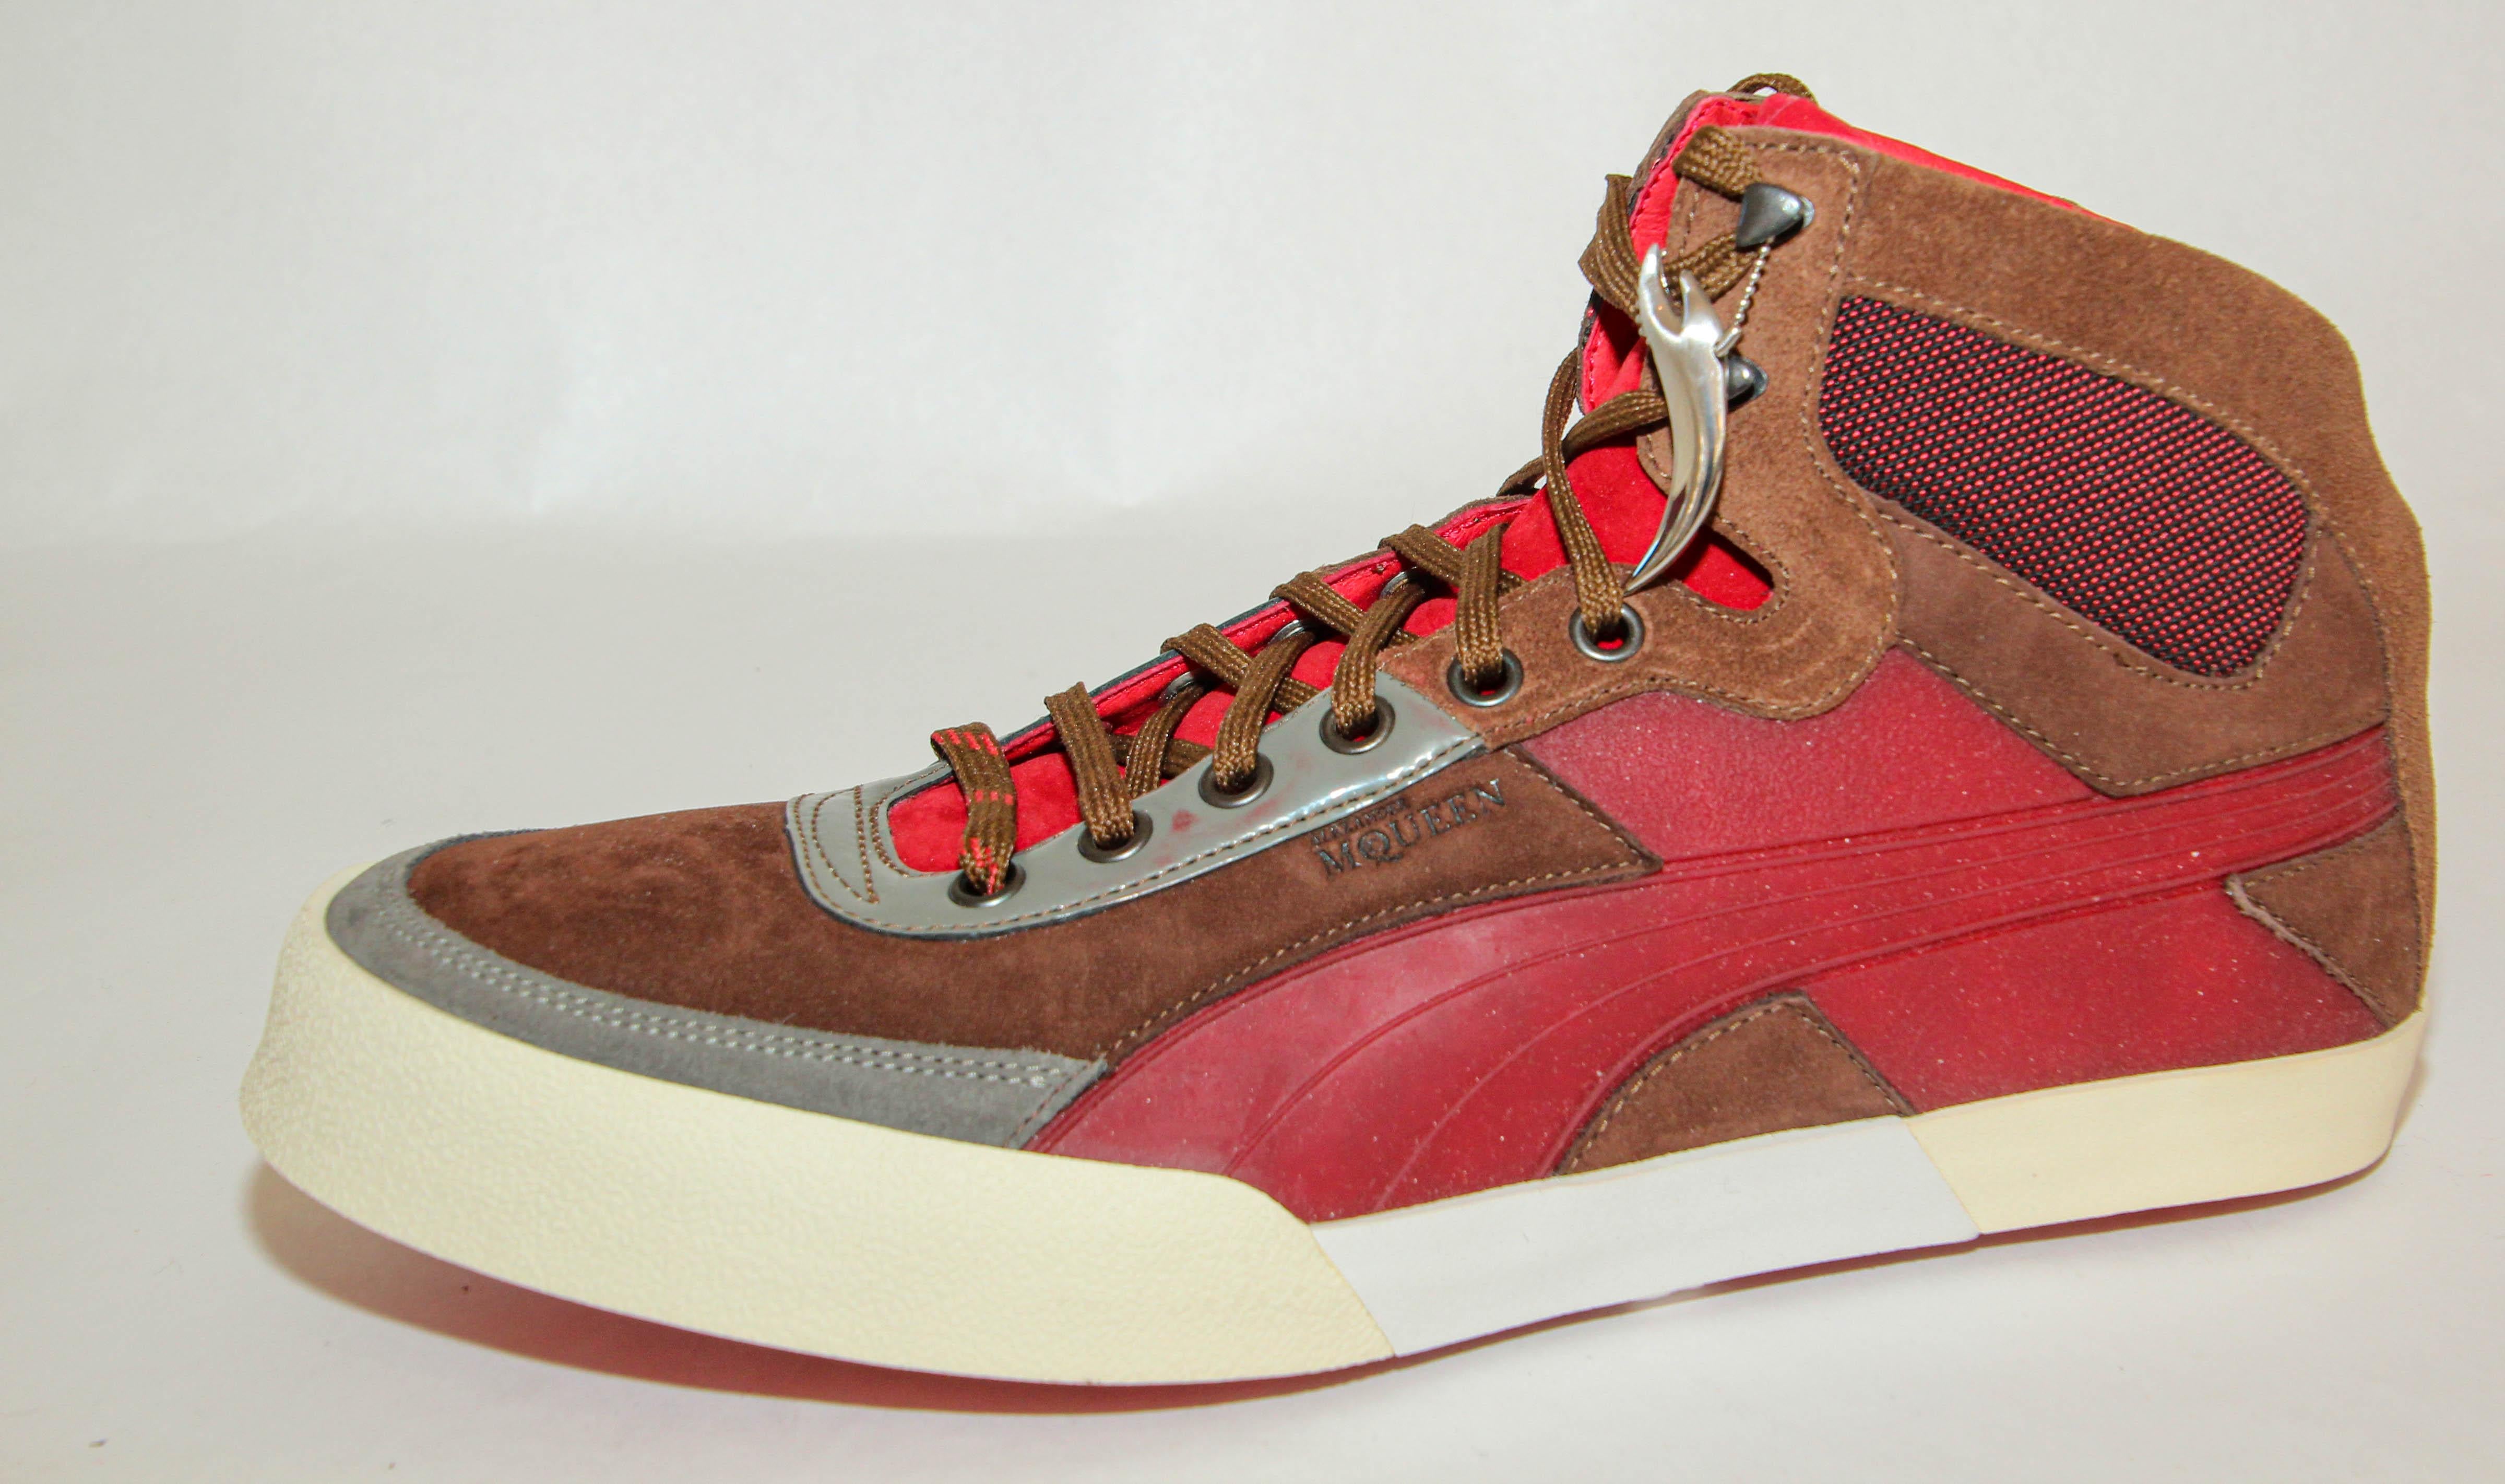 Alexander McQueen X Puma AMQ Trail Trainer Mid Top Sneakers Red Suede US 9 For Sale 1